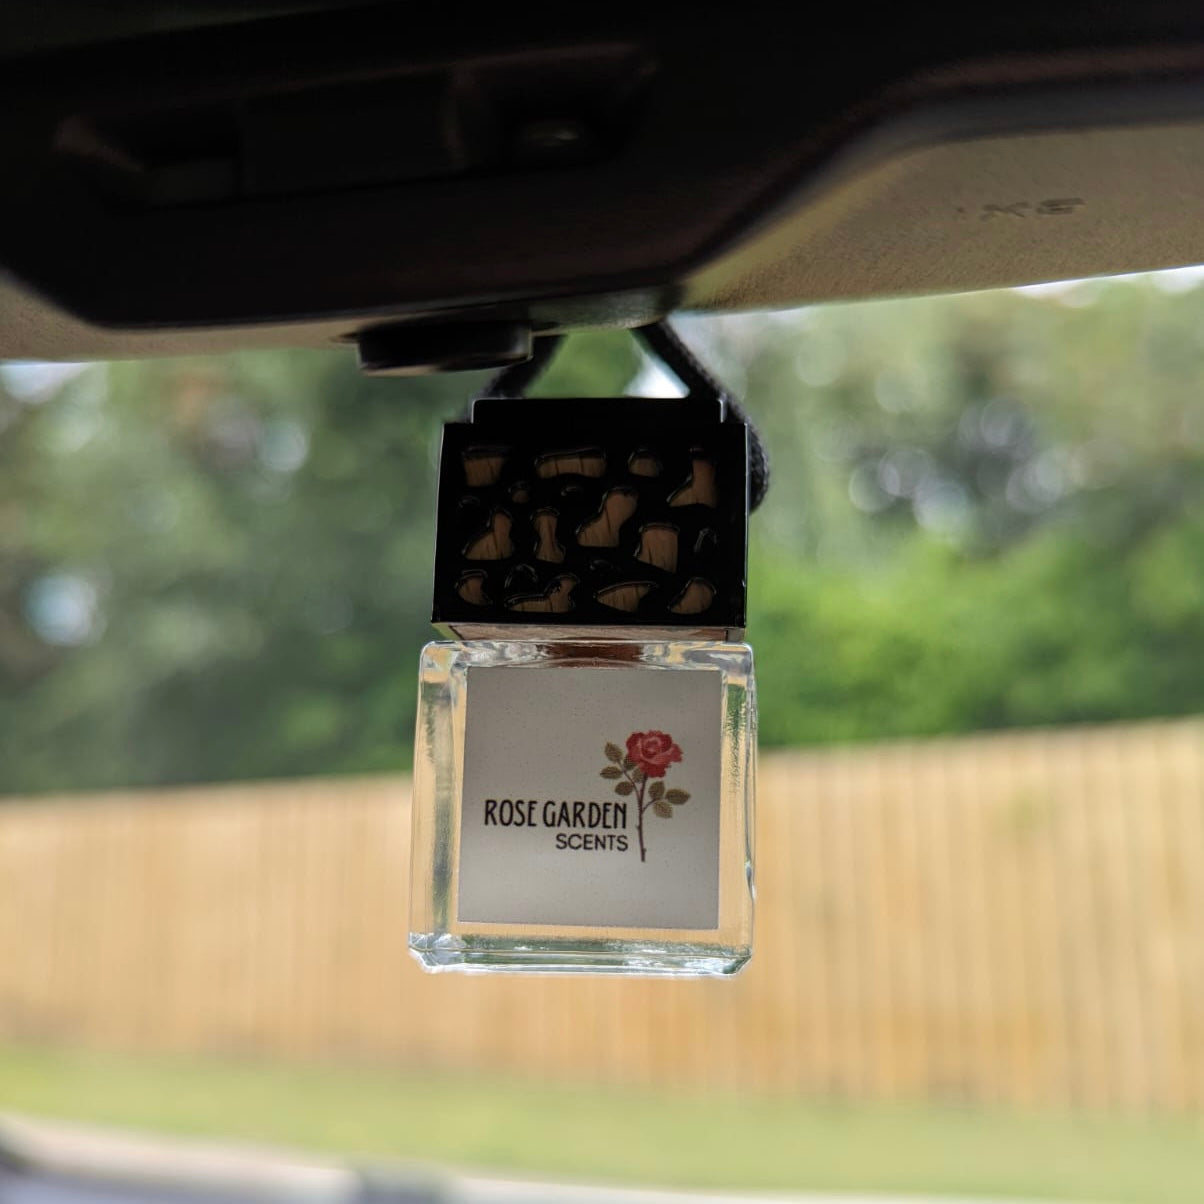 New Car Smell - Hanging Car Diffuser